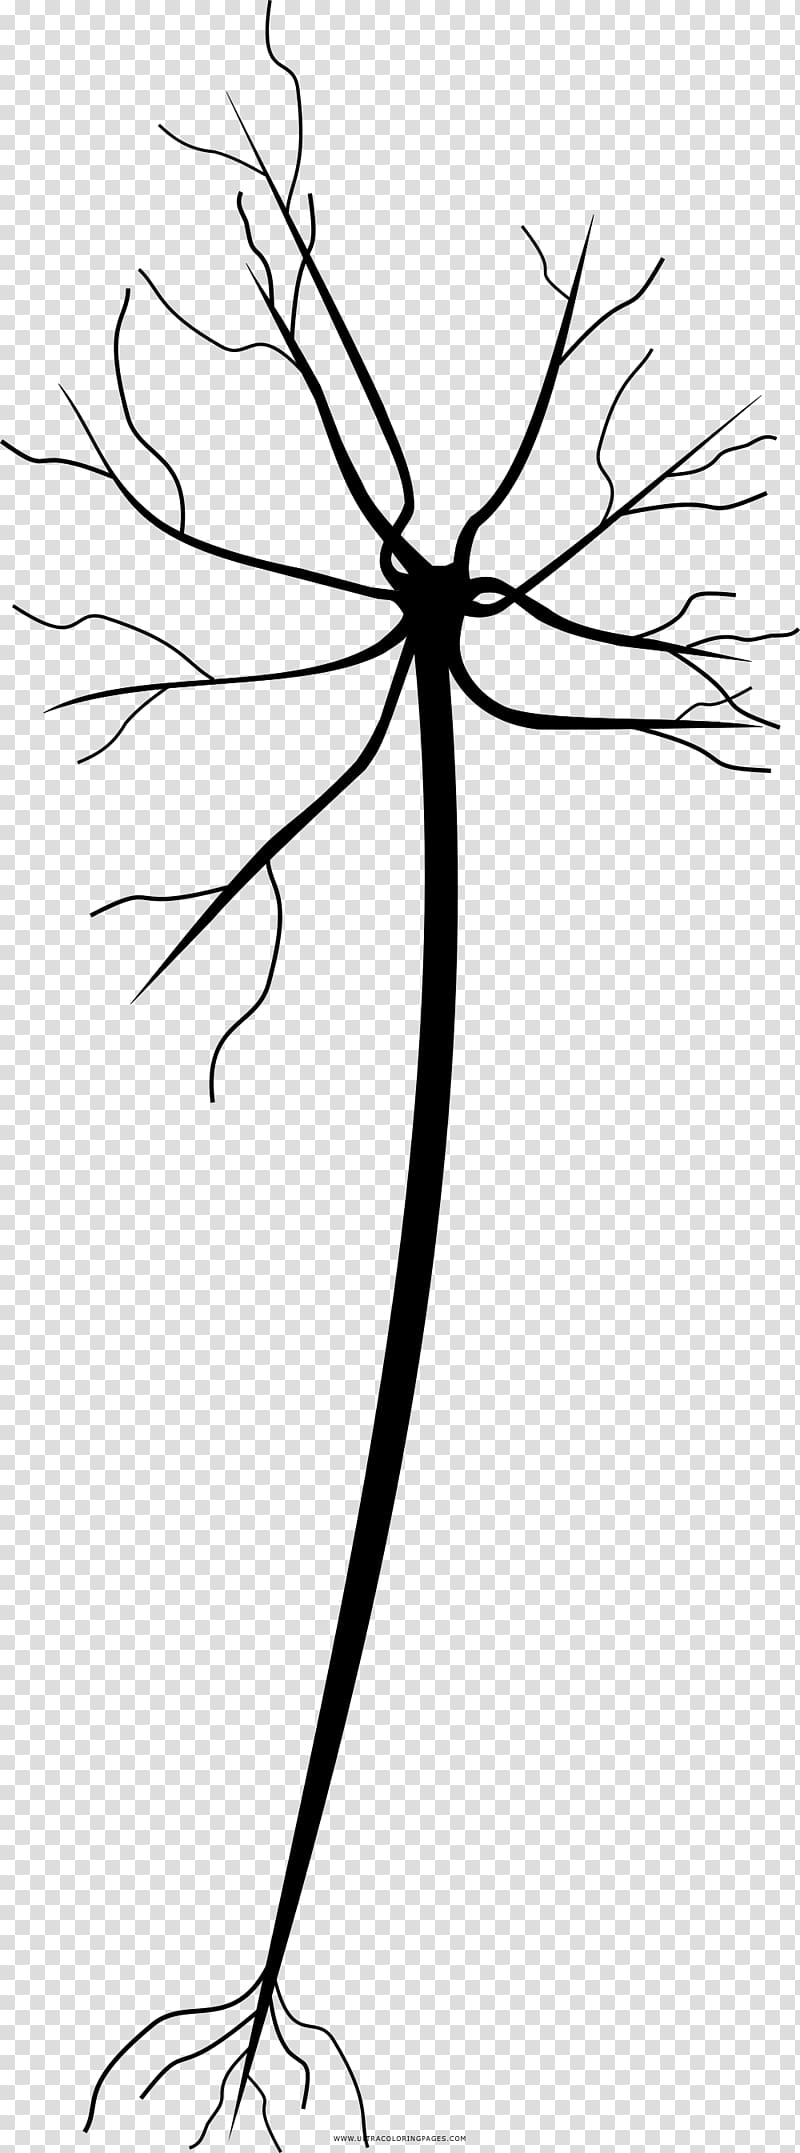 Drawing Neuron Coloring book Line art Painting, neuron transparent background PNG clipart